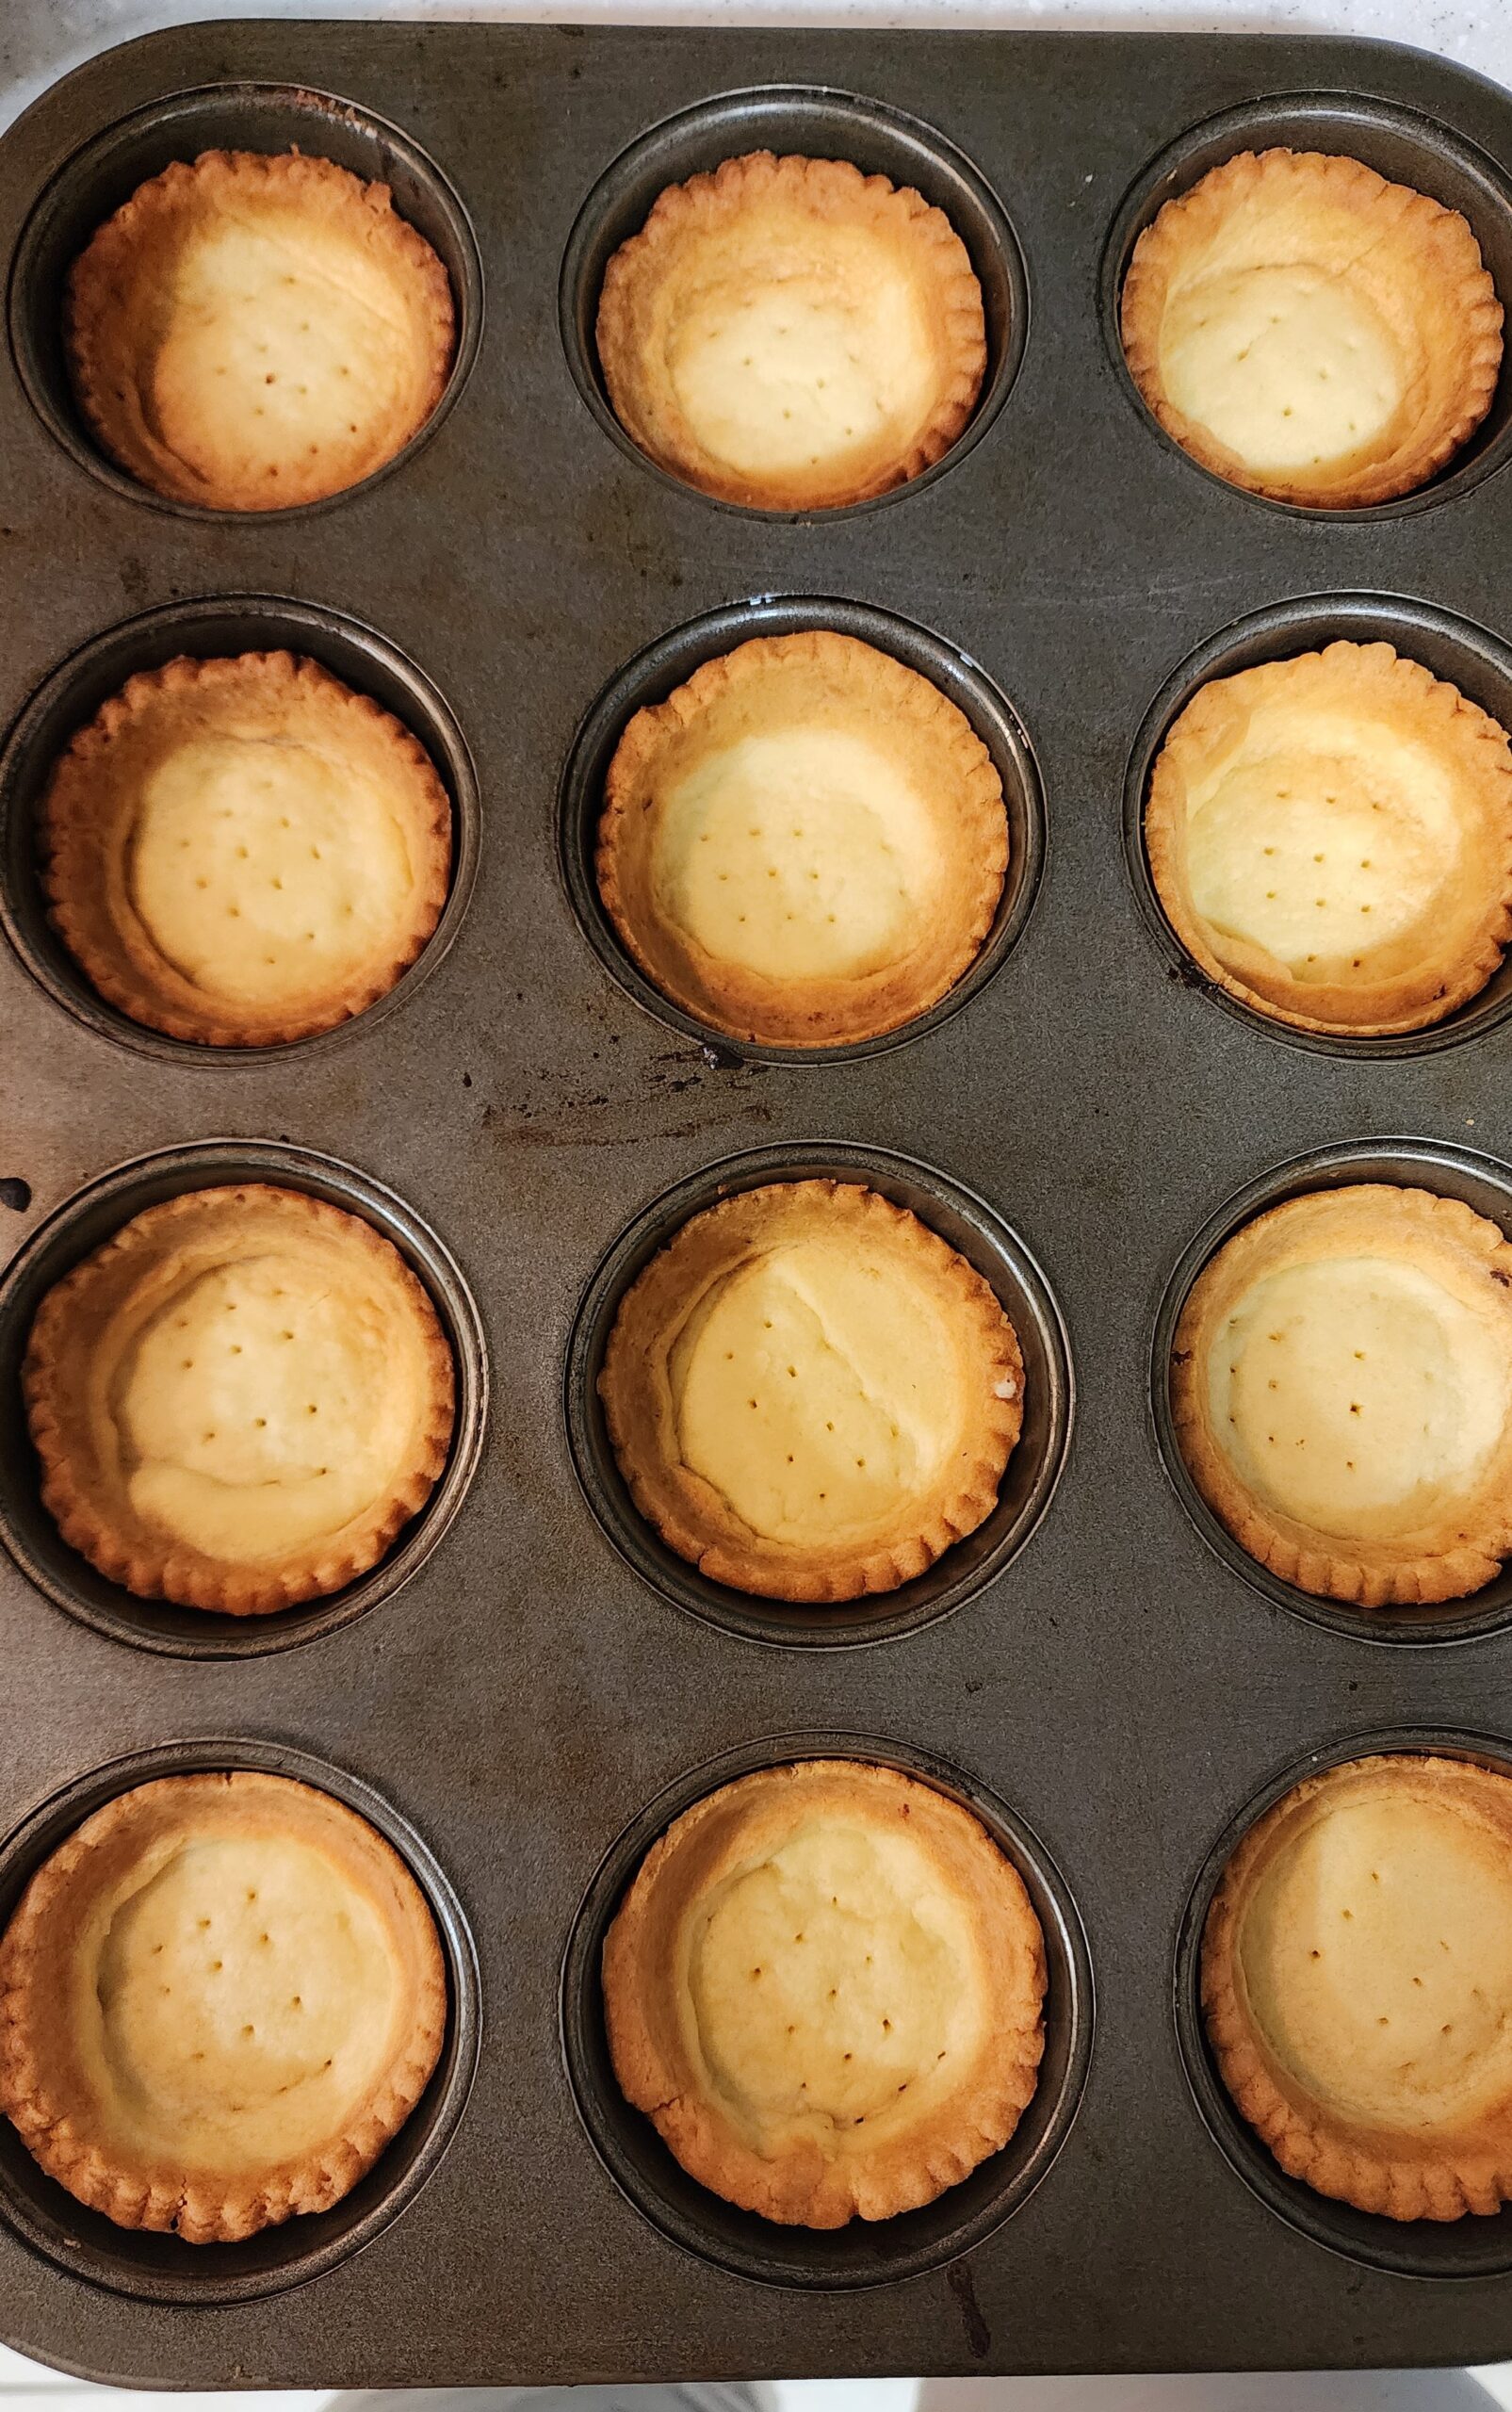 Baked tart shells placed inside a muffin tray